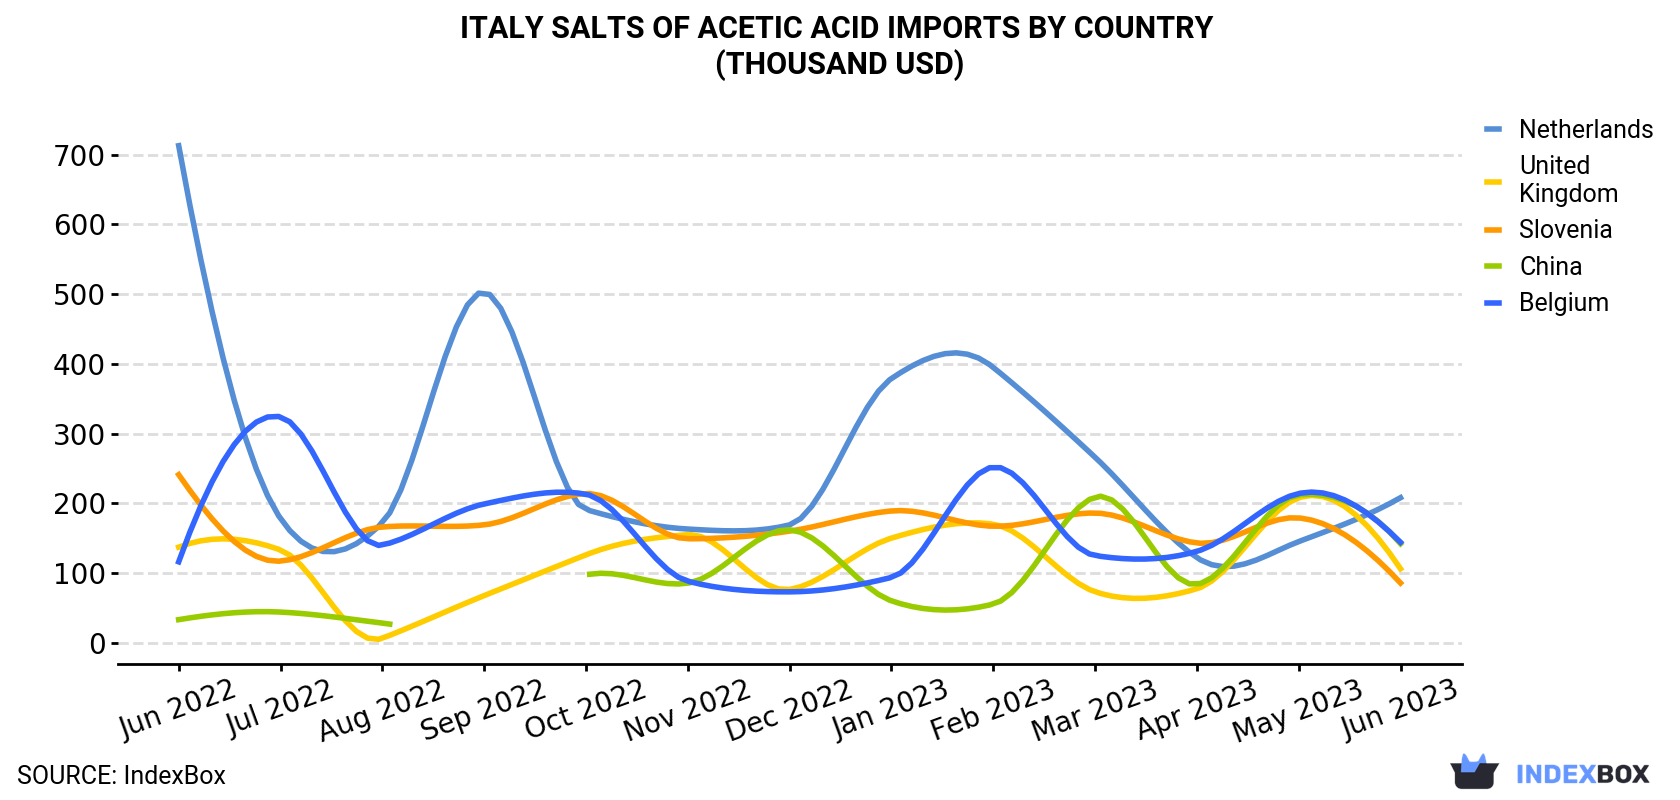 Italy Salts Of Acetic Acid Imports By Country (Thousand USD)